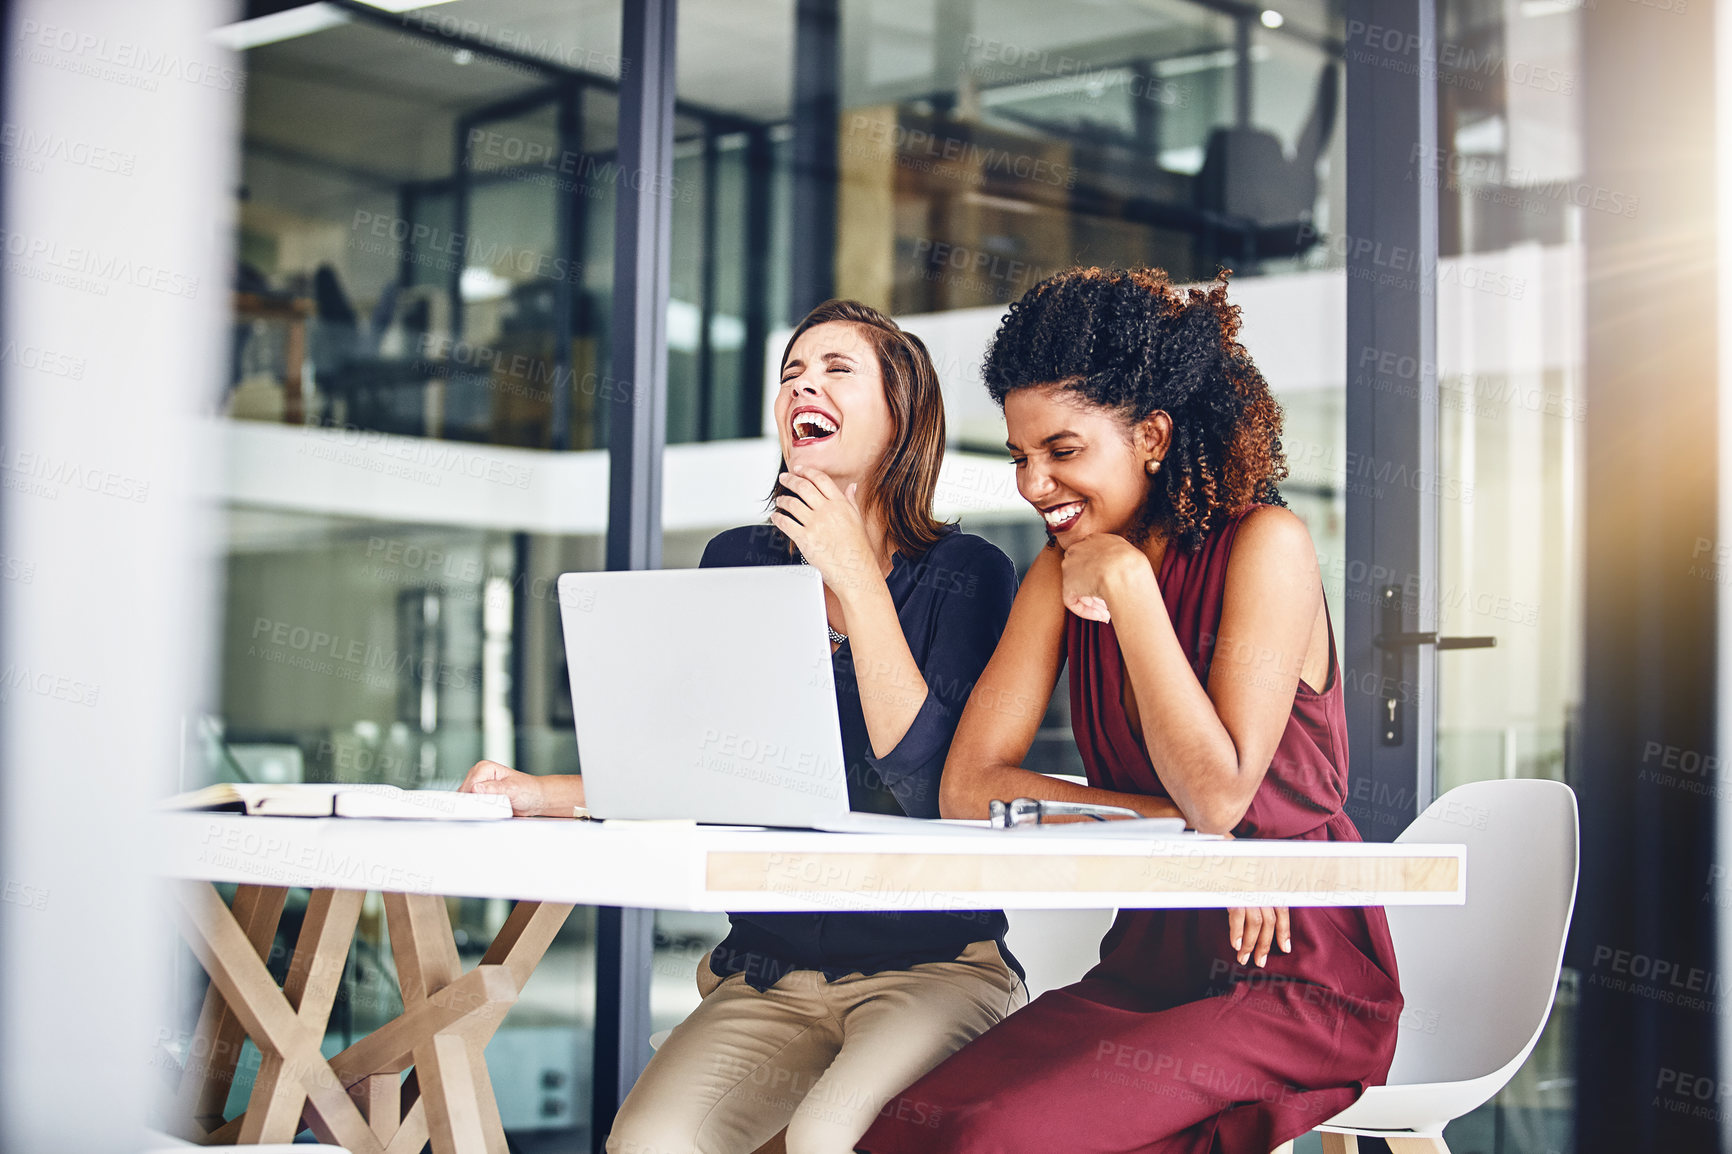 Buy stock photo Cropped shot of two young businesswomen using a laptop in an office